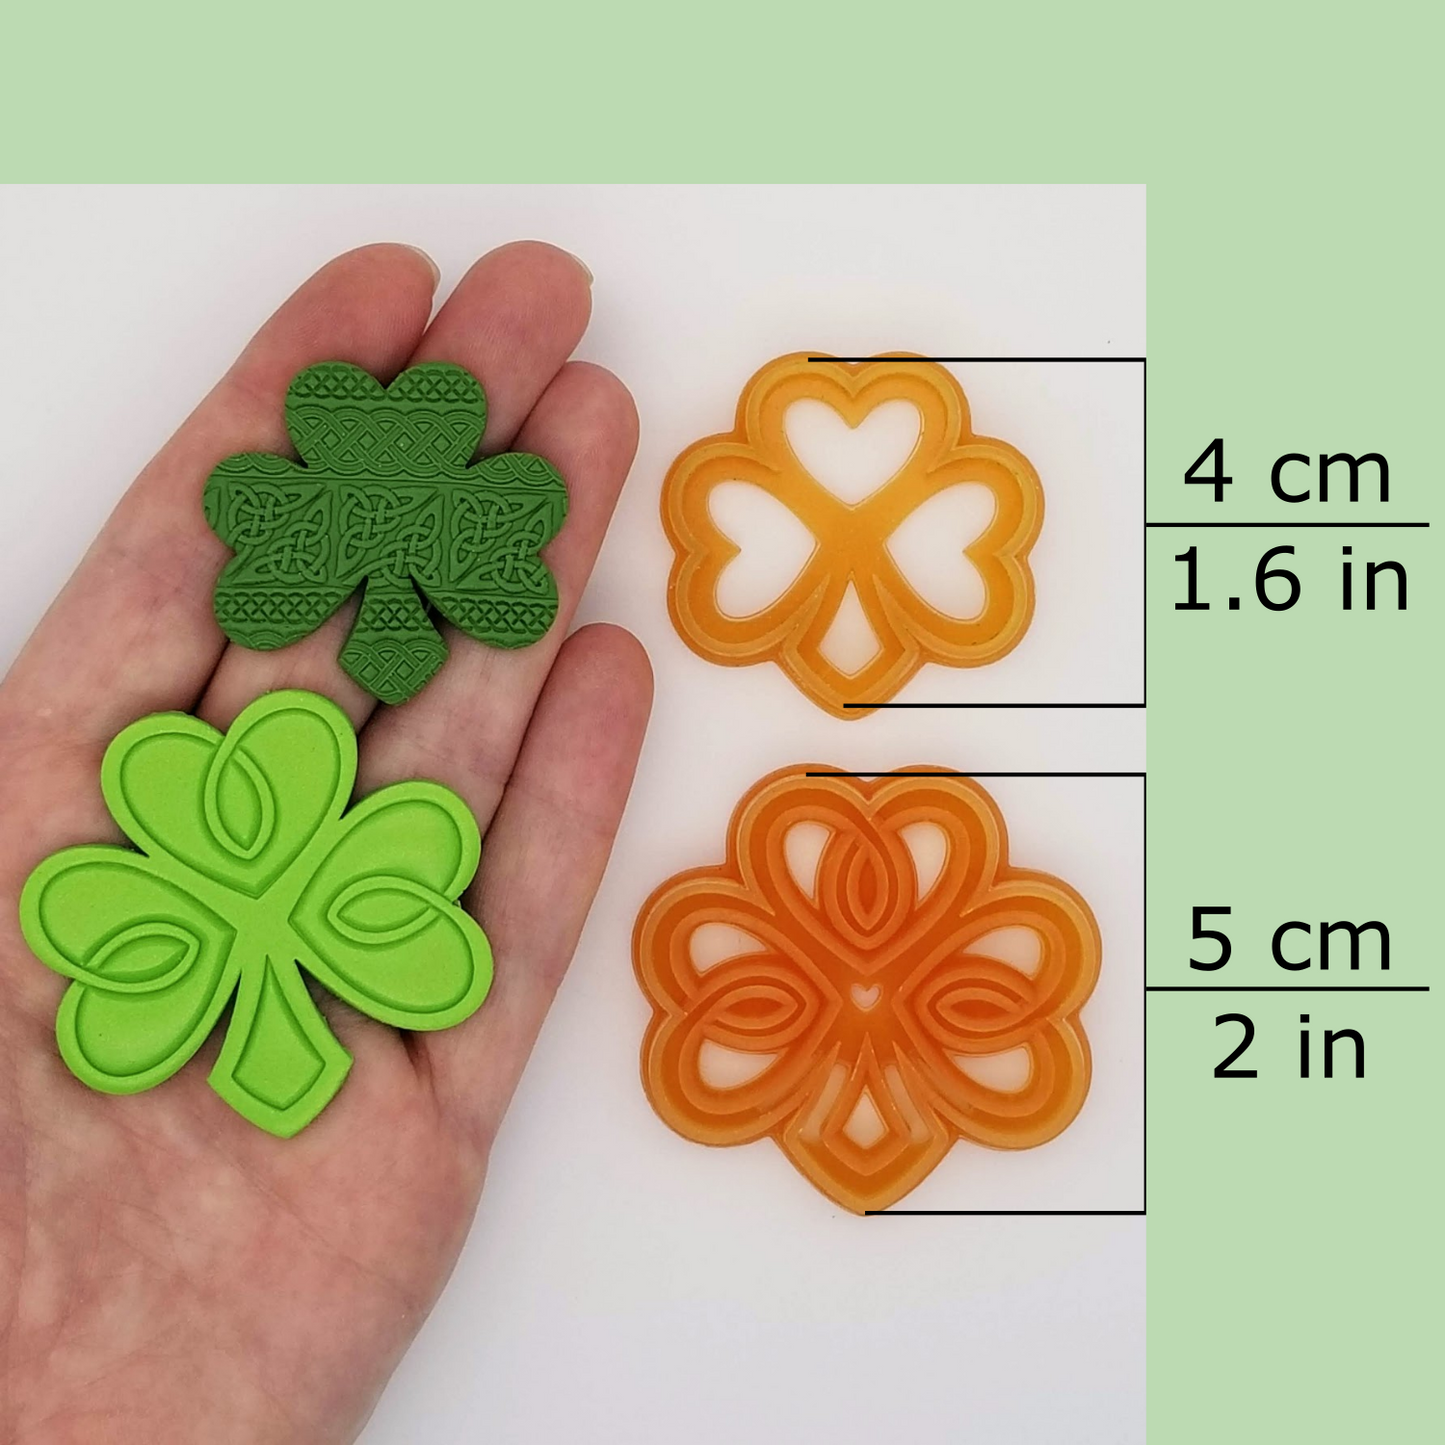 Celtic Shamrock polymer clay cutter available sizes, 4 centimeters / 1.6 inches, 5 centimeters / 2 inches